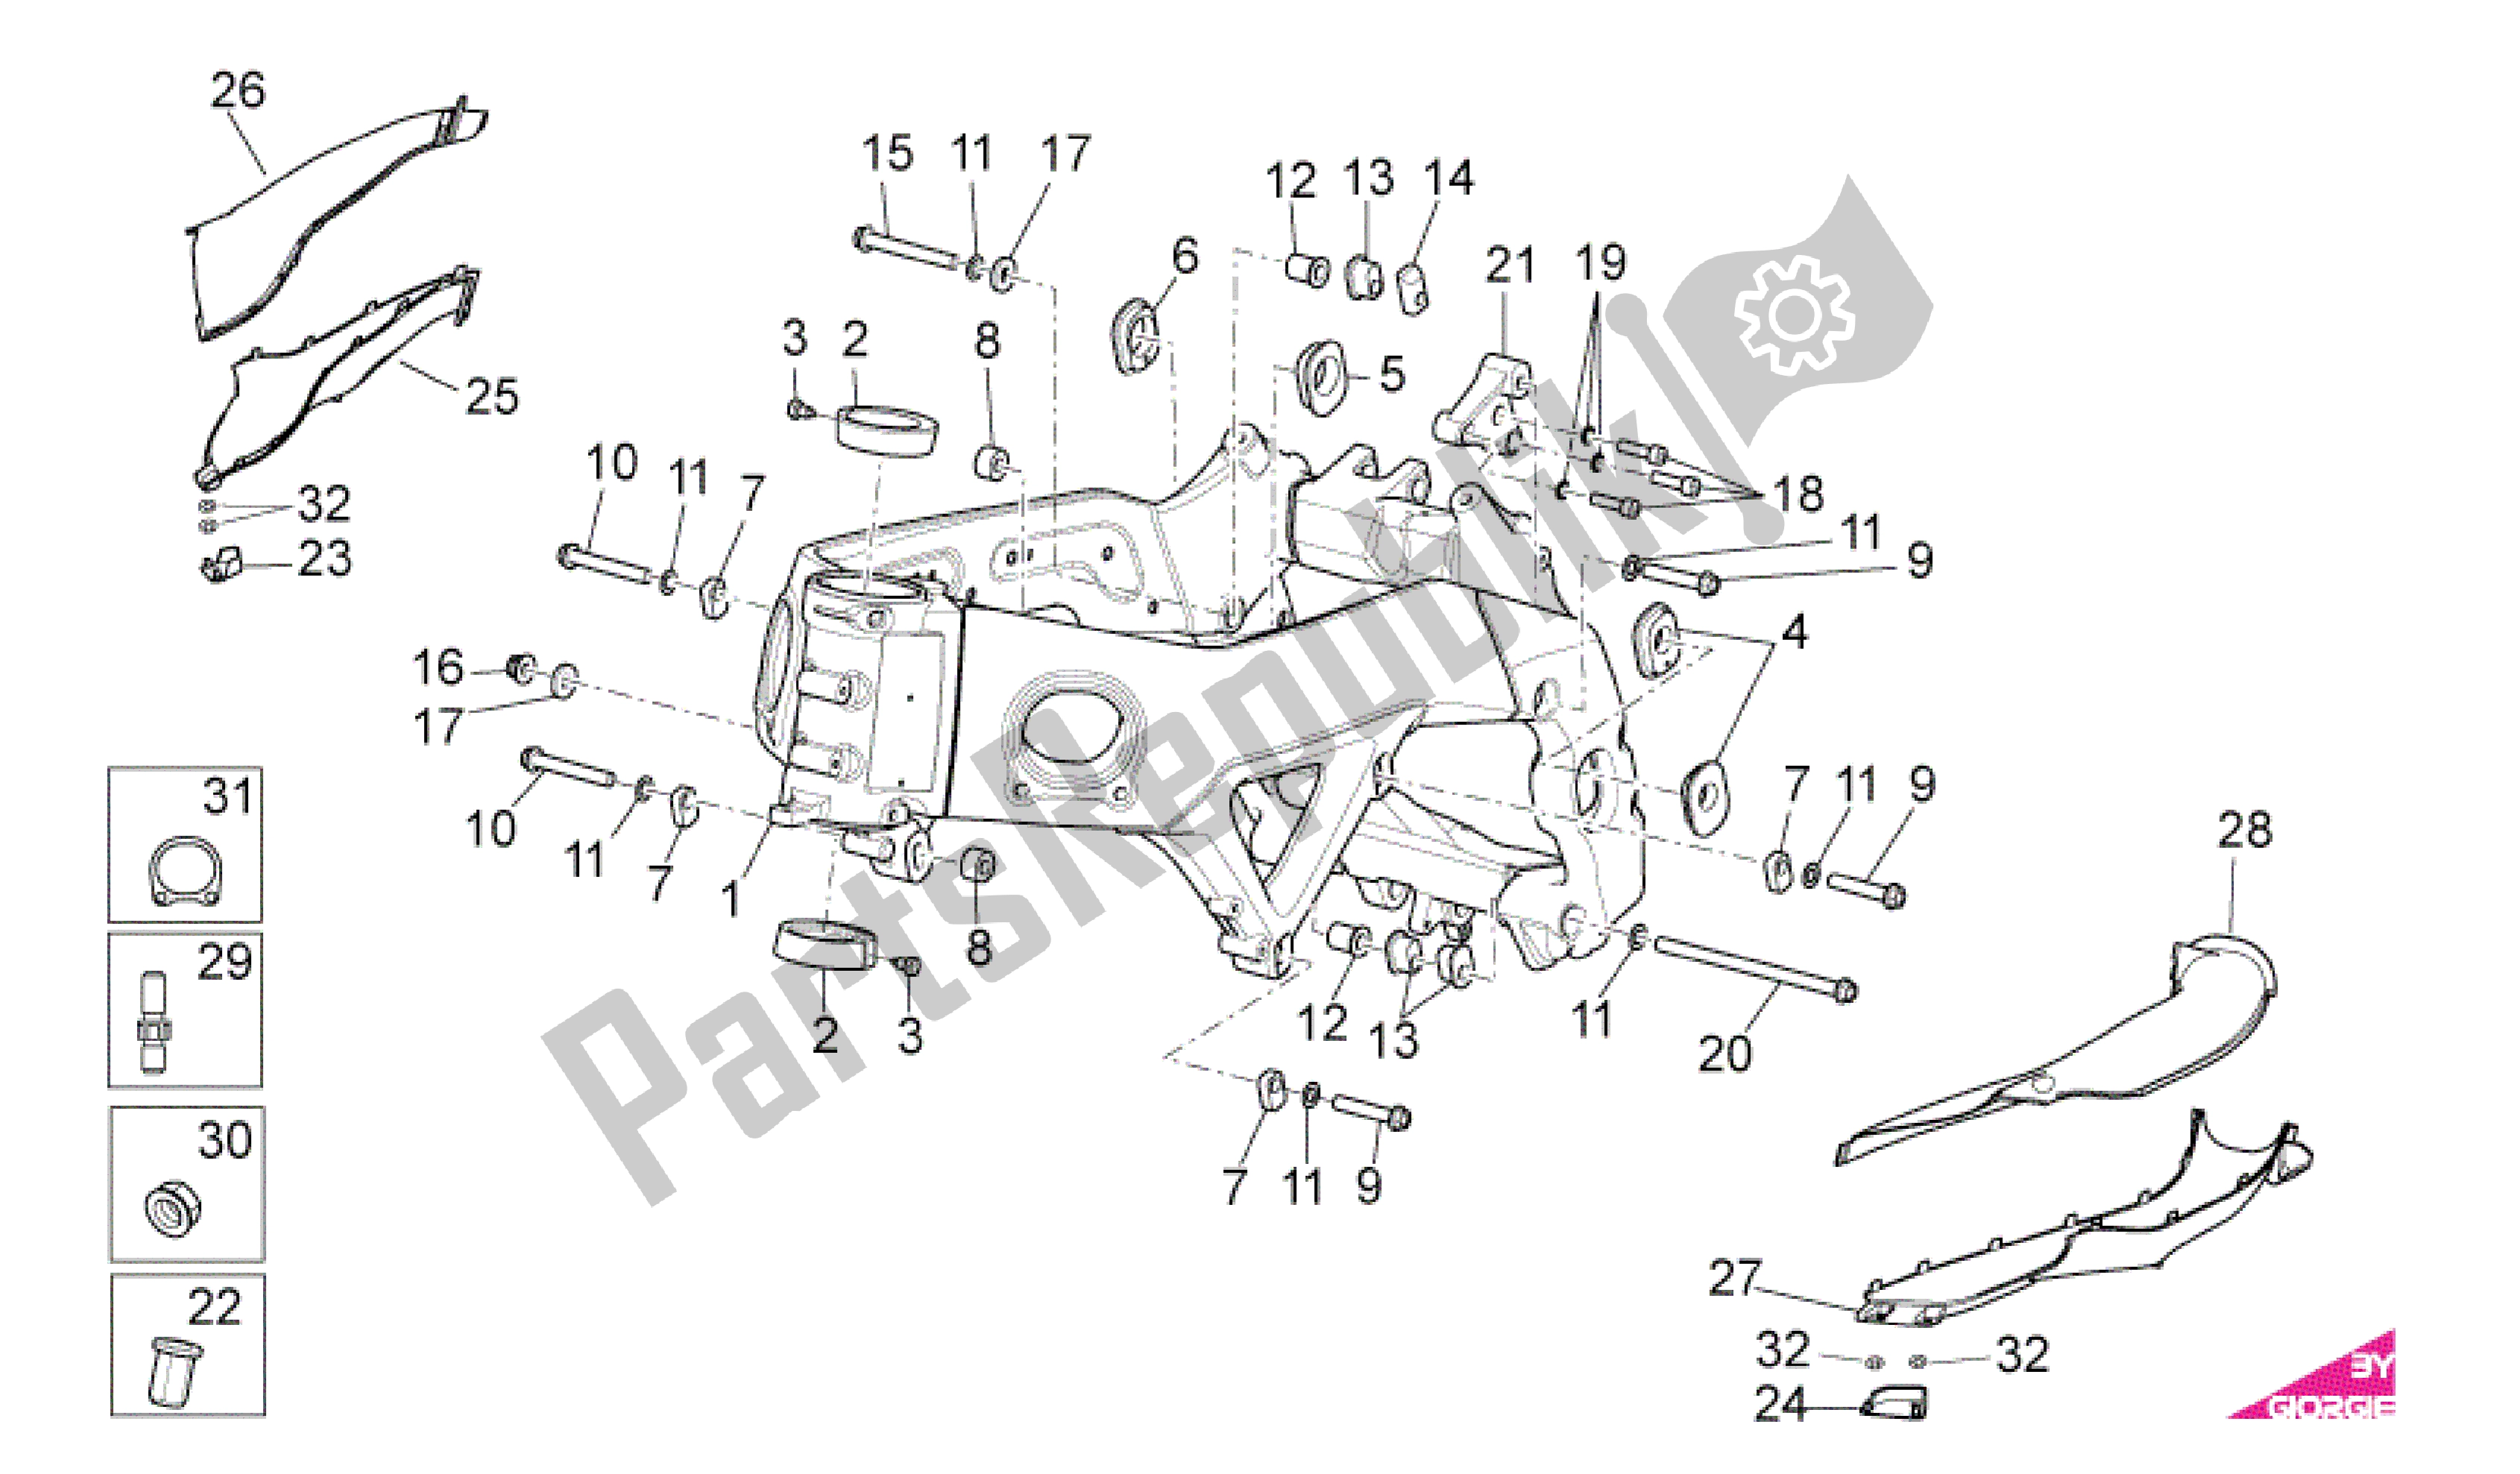 All parts for the Frame I of the Aprilia RSV4 Factory SBK Racing 3979 1000 2009 - 2010